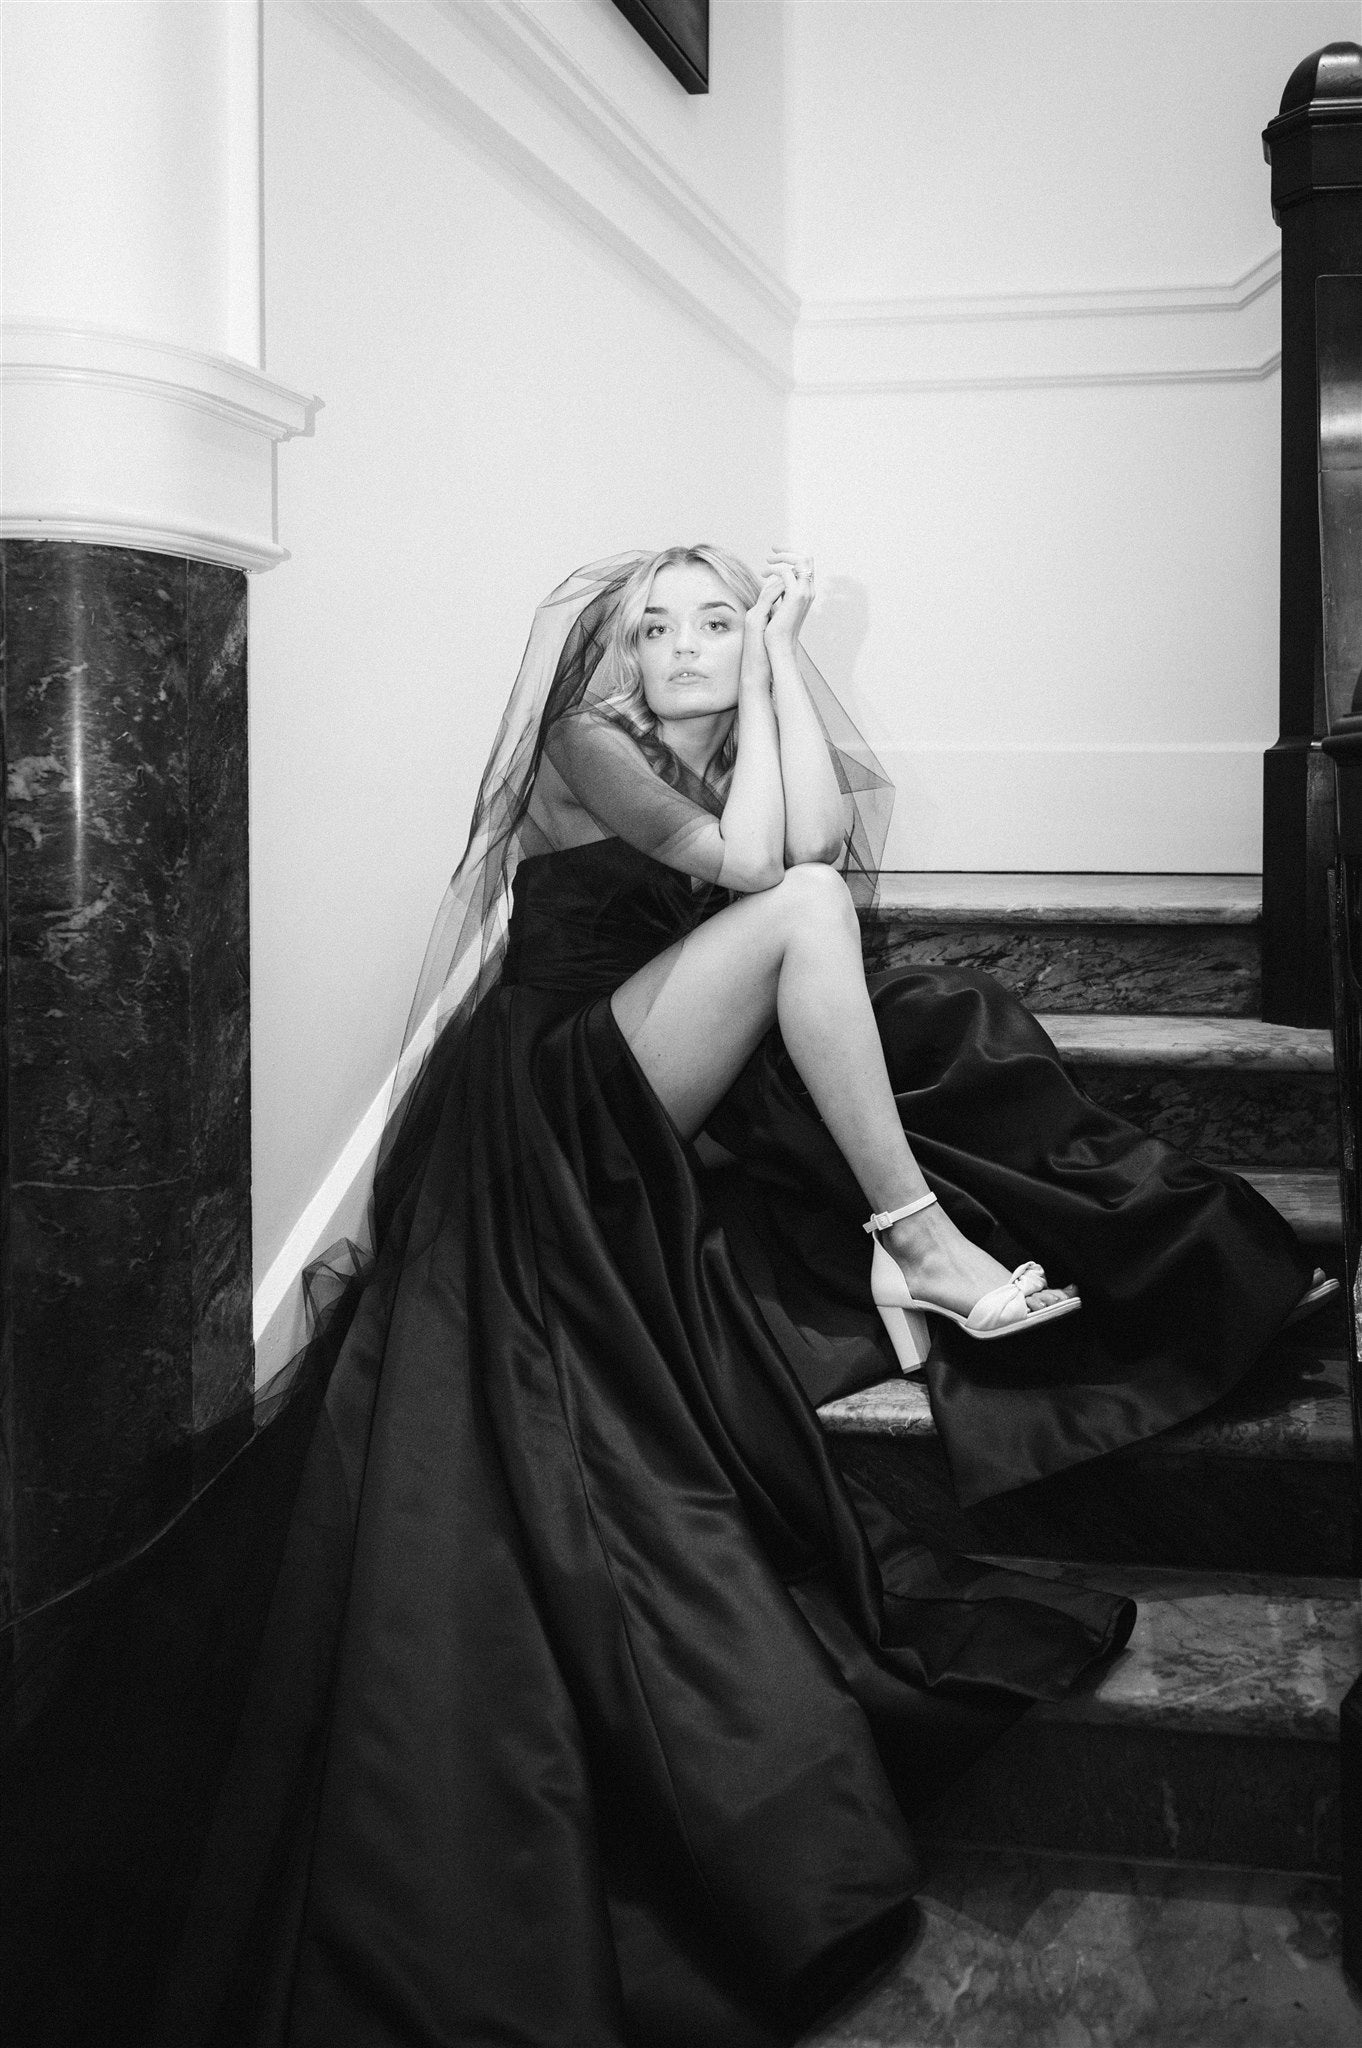 Model wears black satin gown and black veil. She sits on marble stairs.